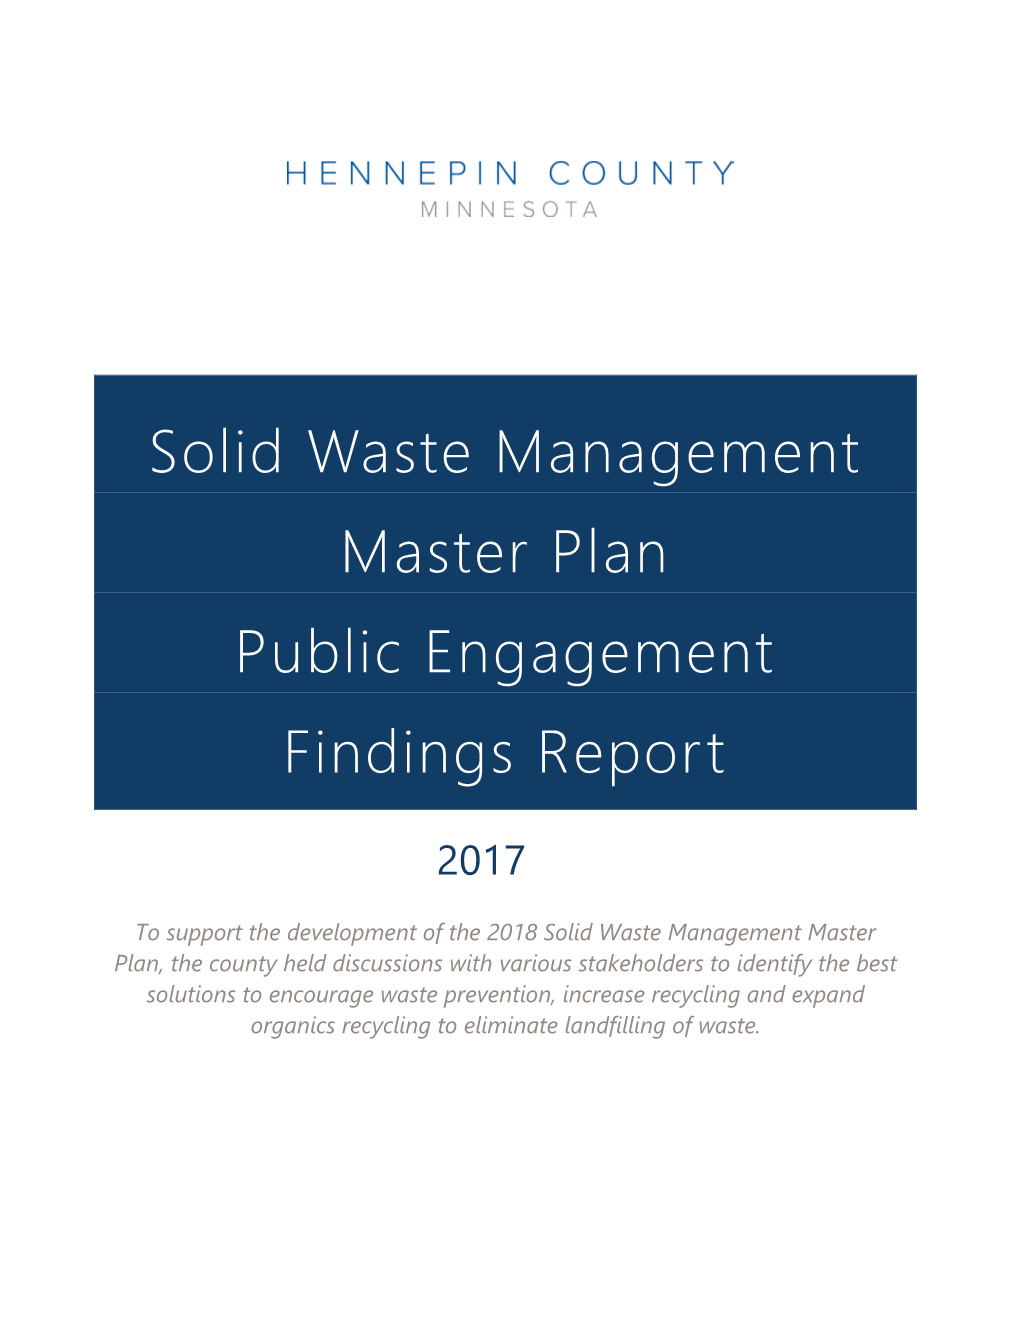 Solid Waste Management Master Plan Public Engagement Findings Report